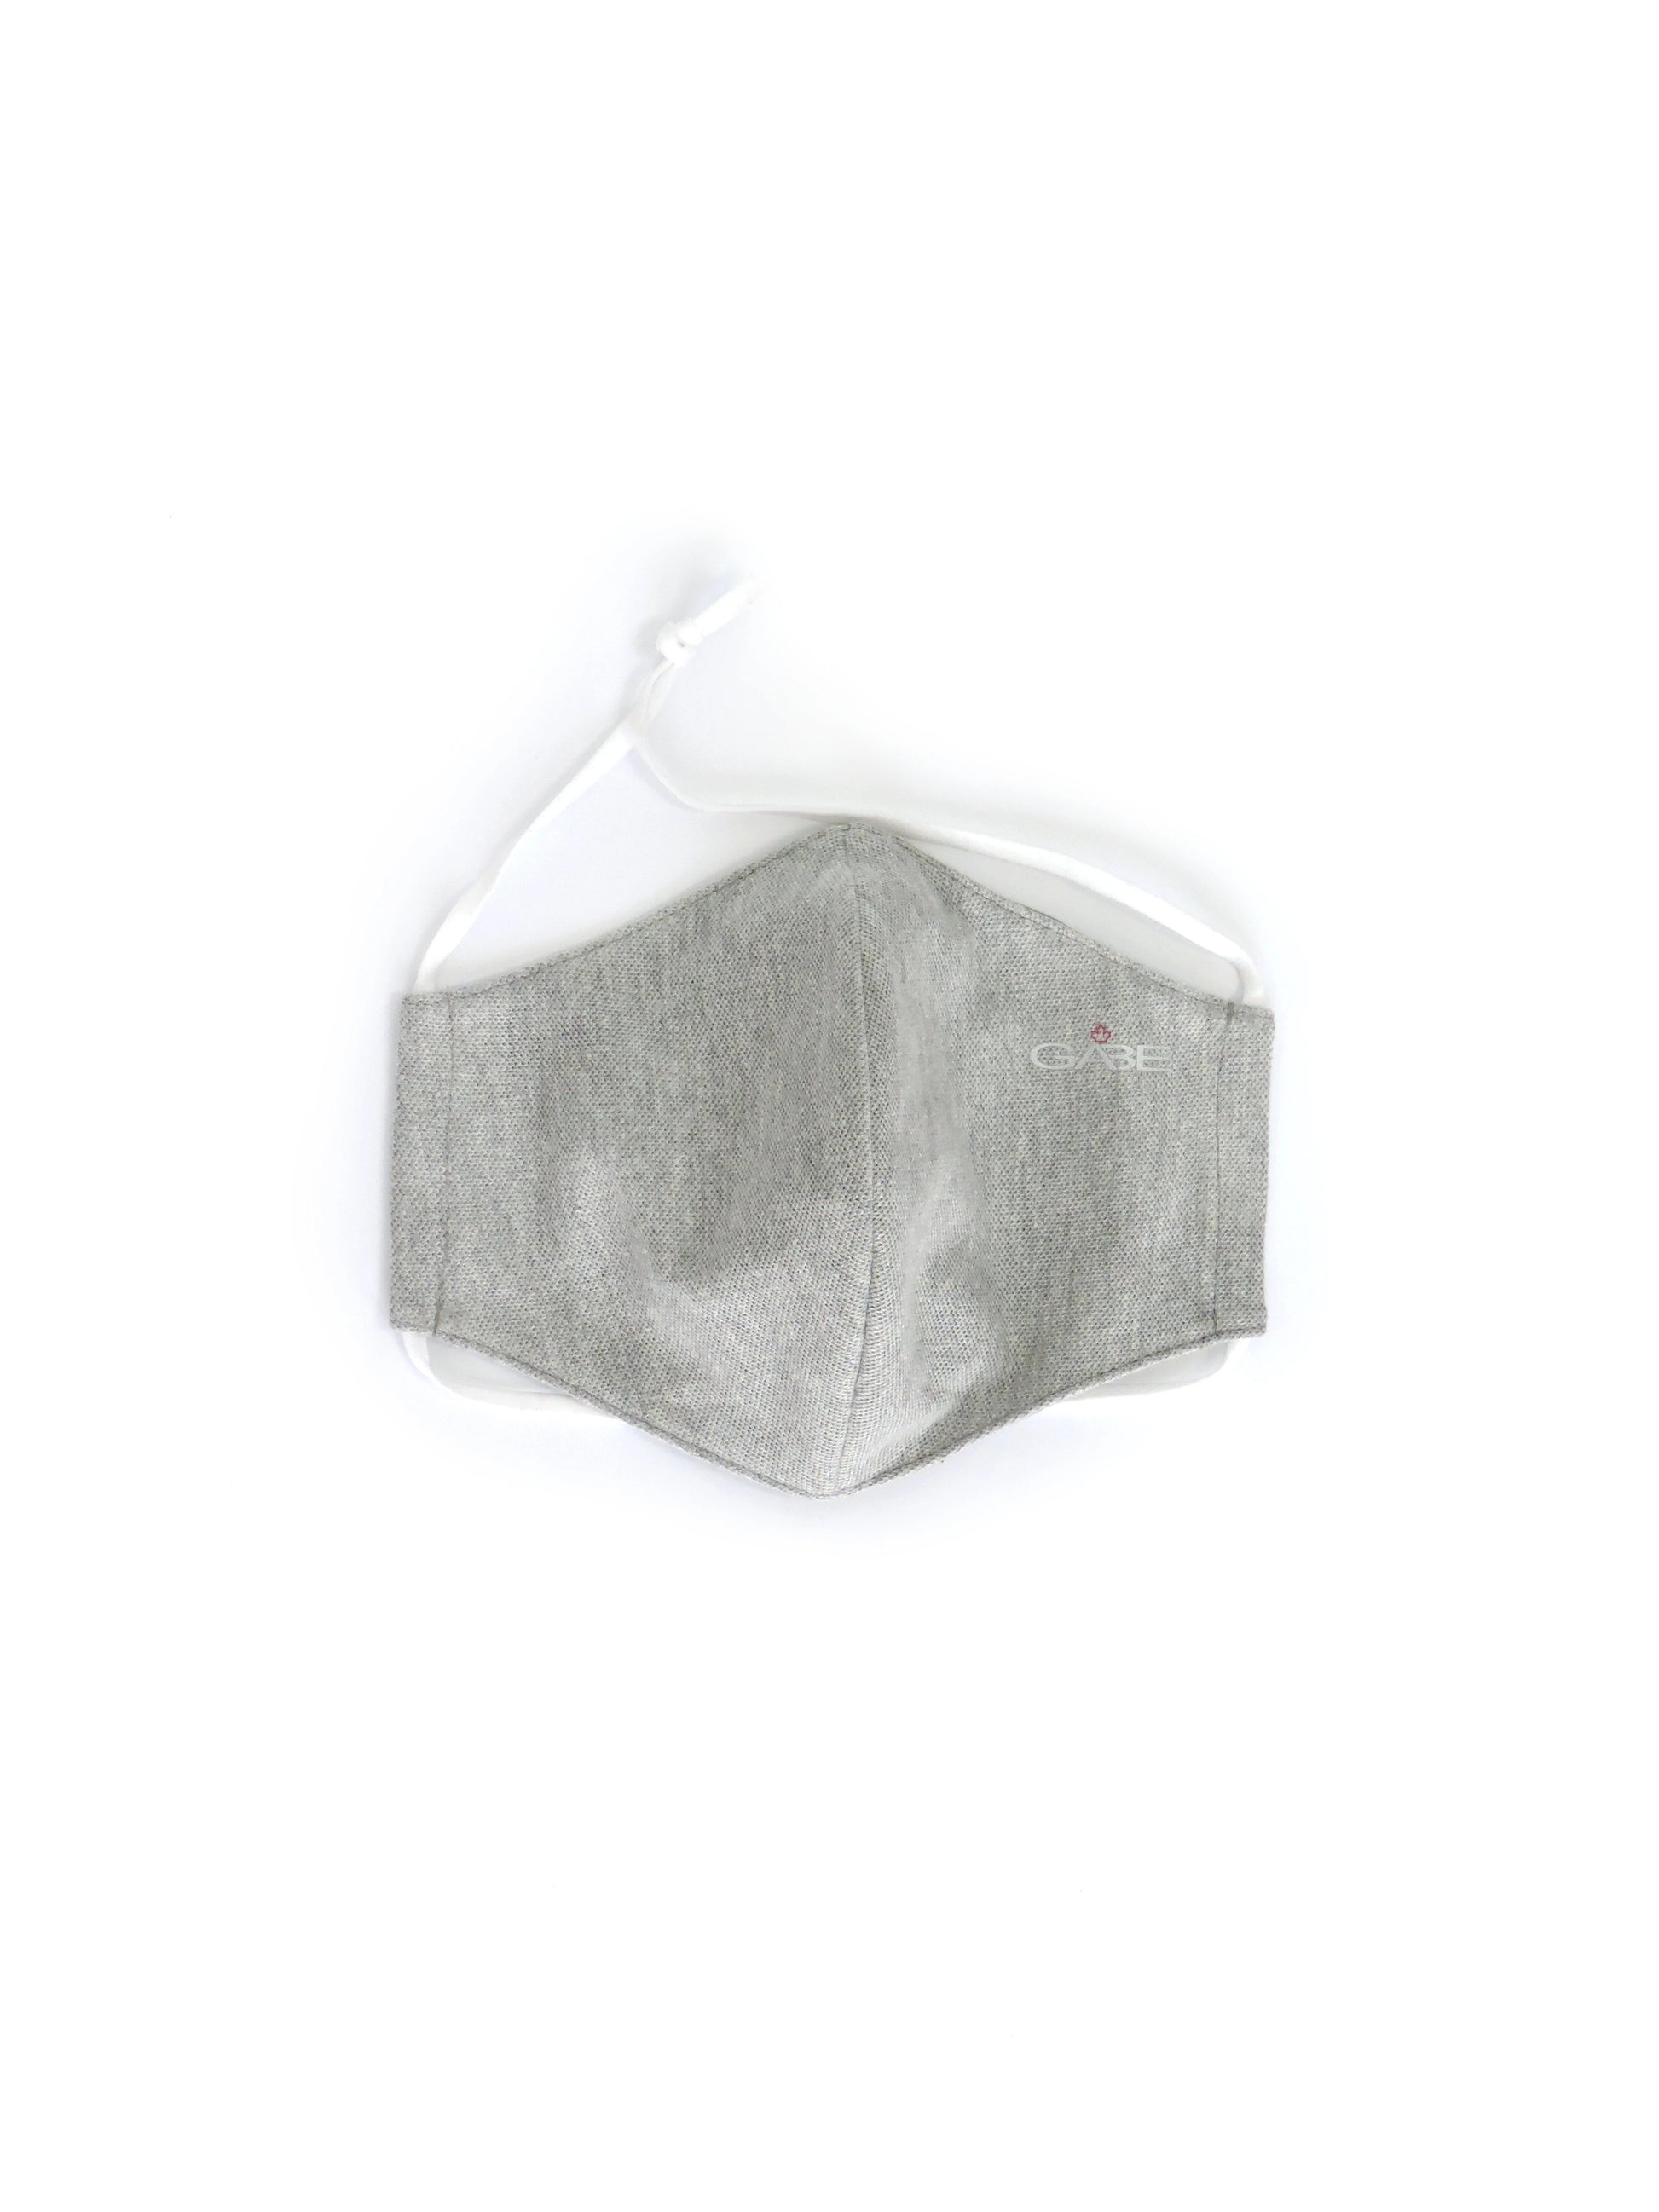 Thick Grey Cotton Mask with Gabe Logo